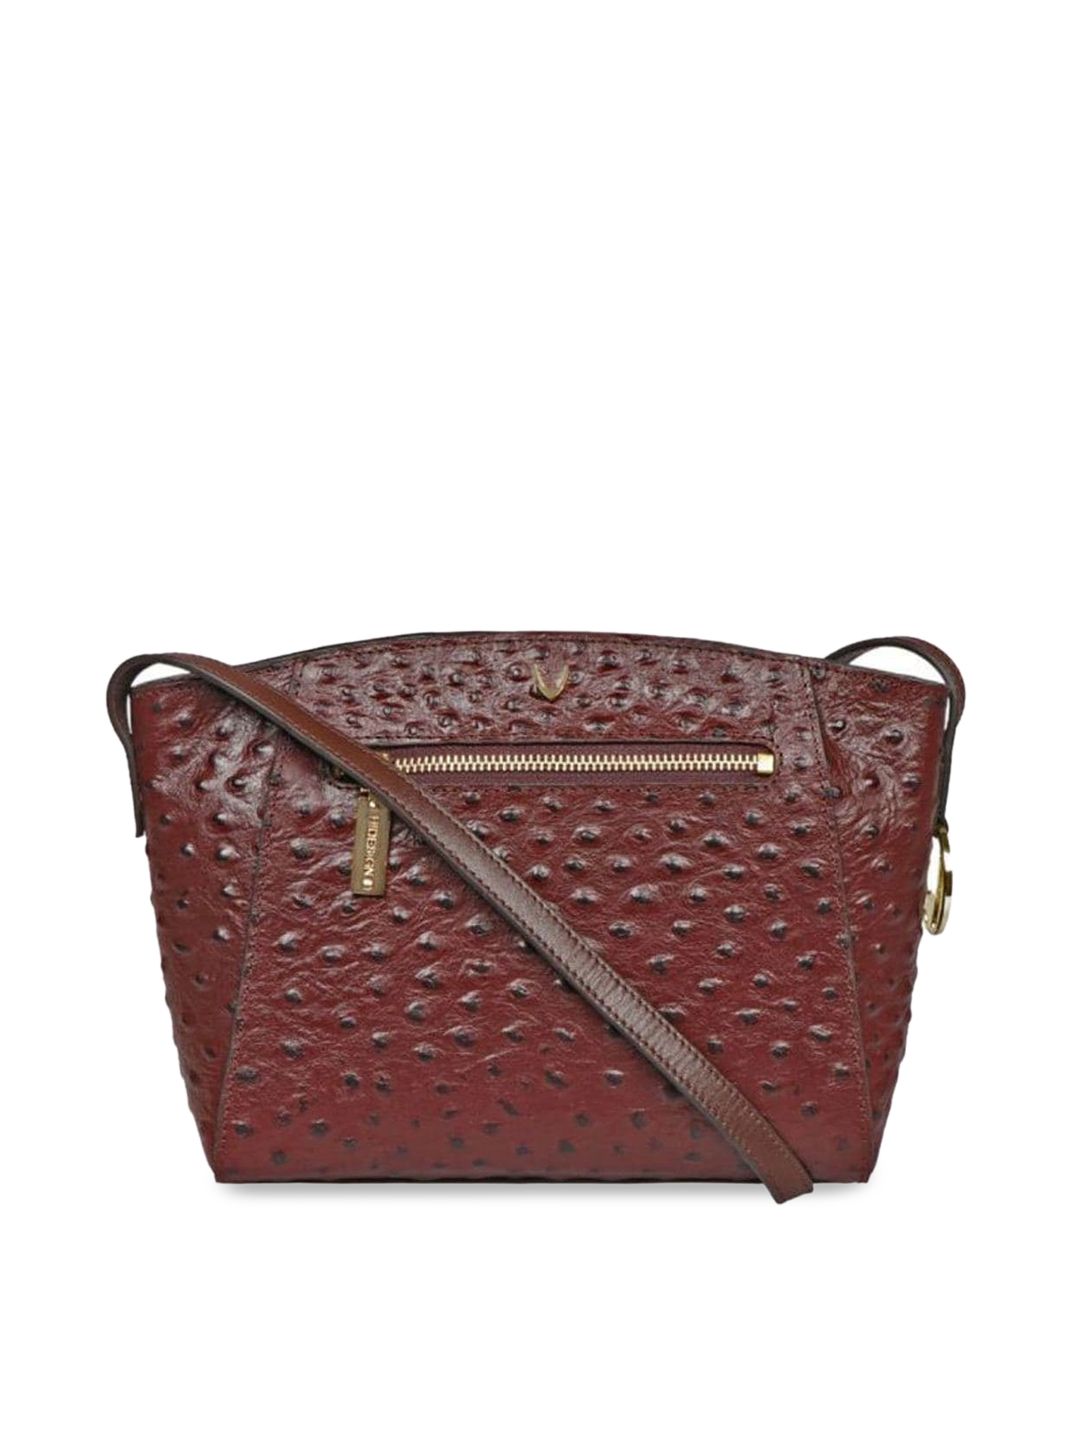 Hidesign Brown Textured Leather Structured Sling Bag with Cut Work Price in India